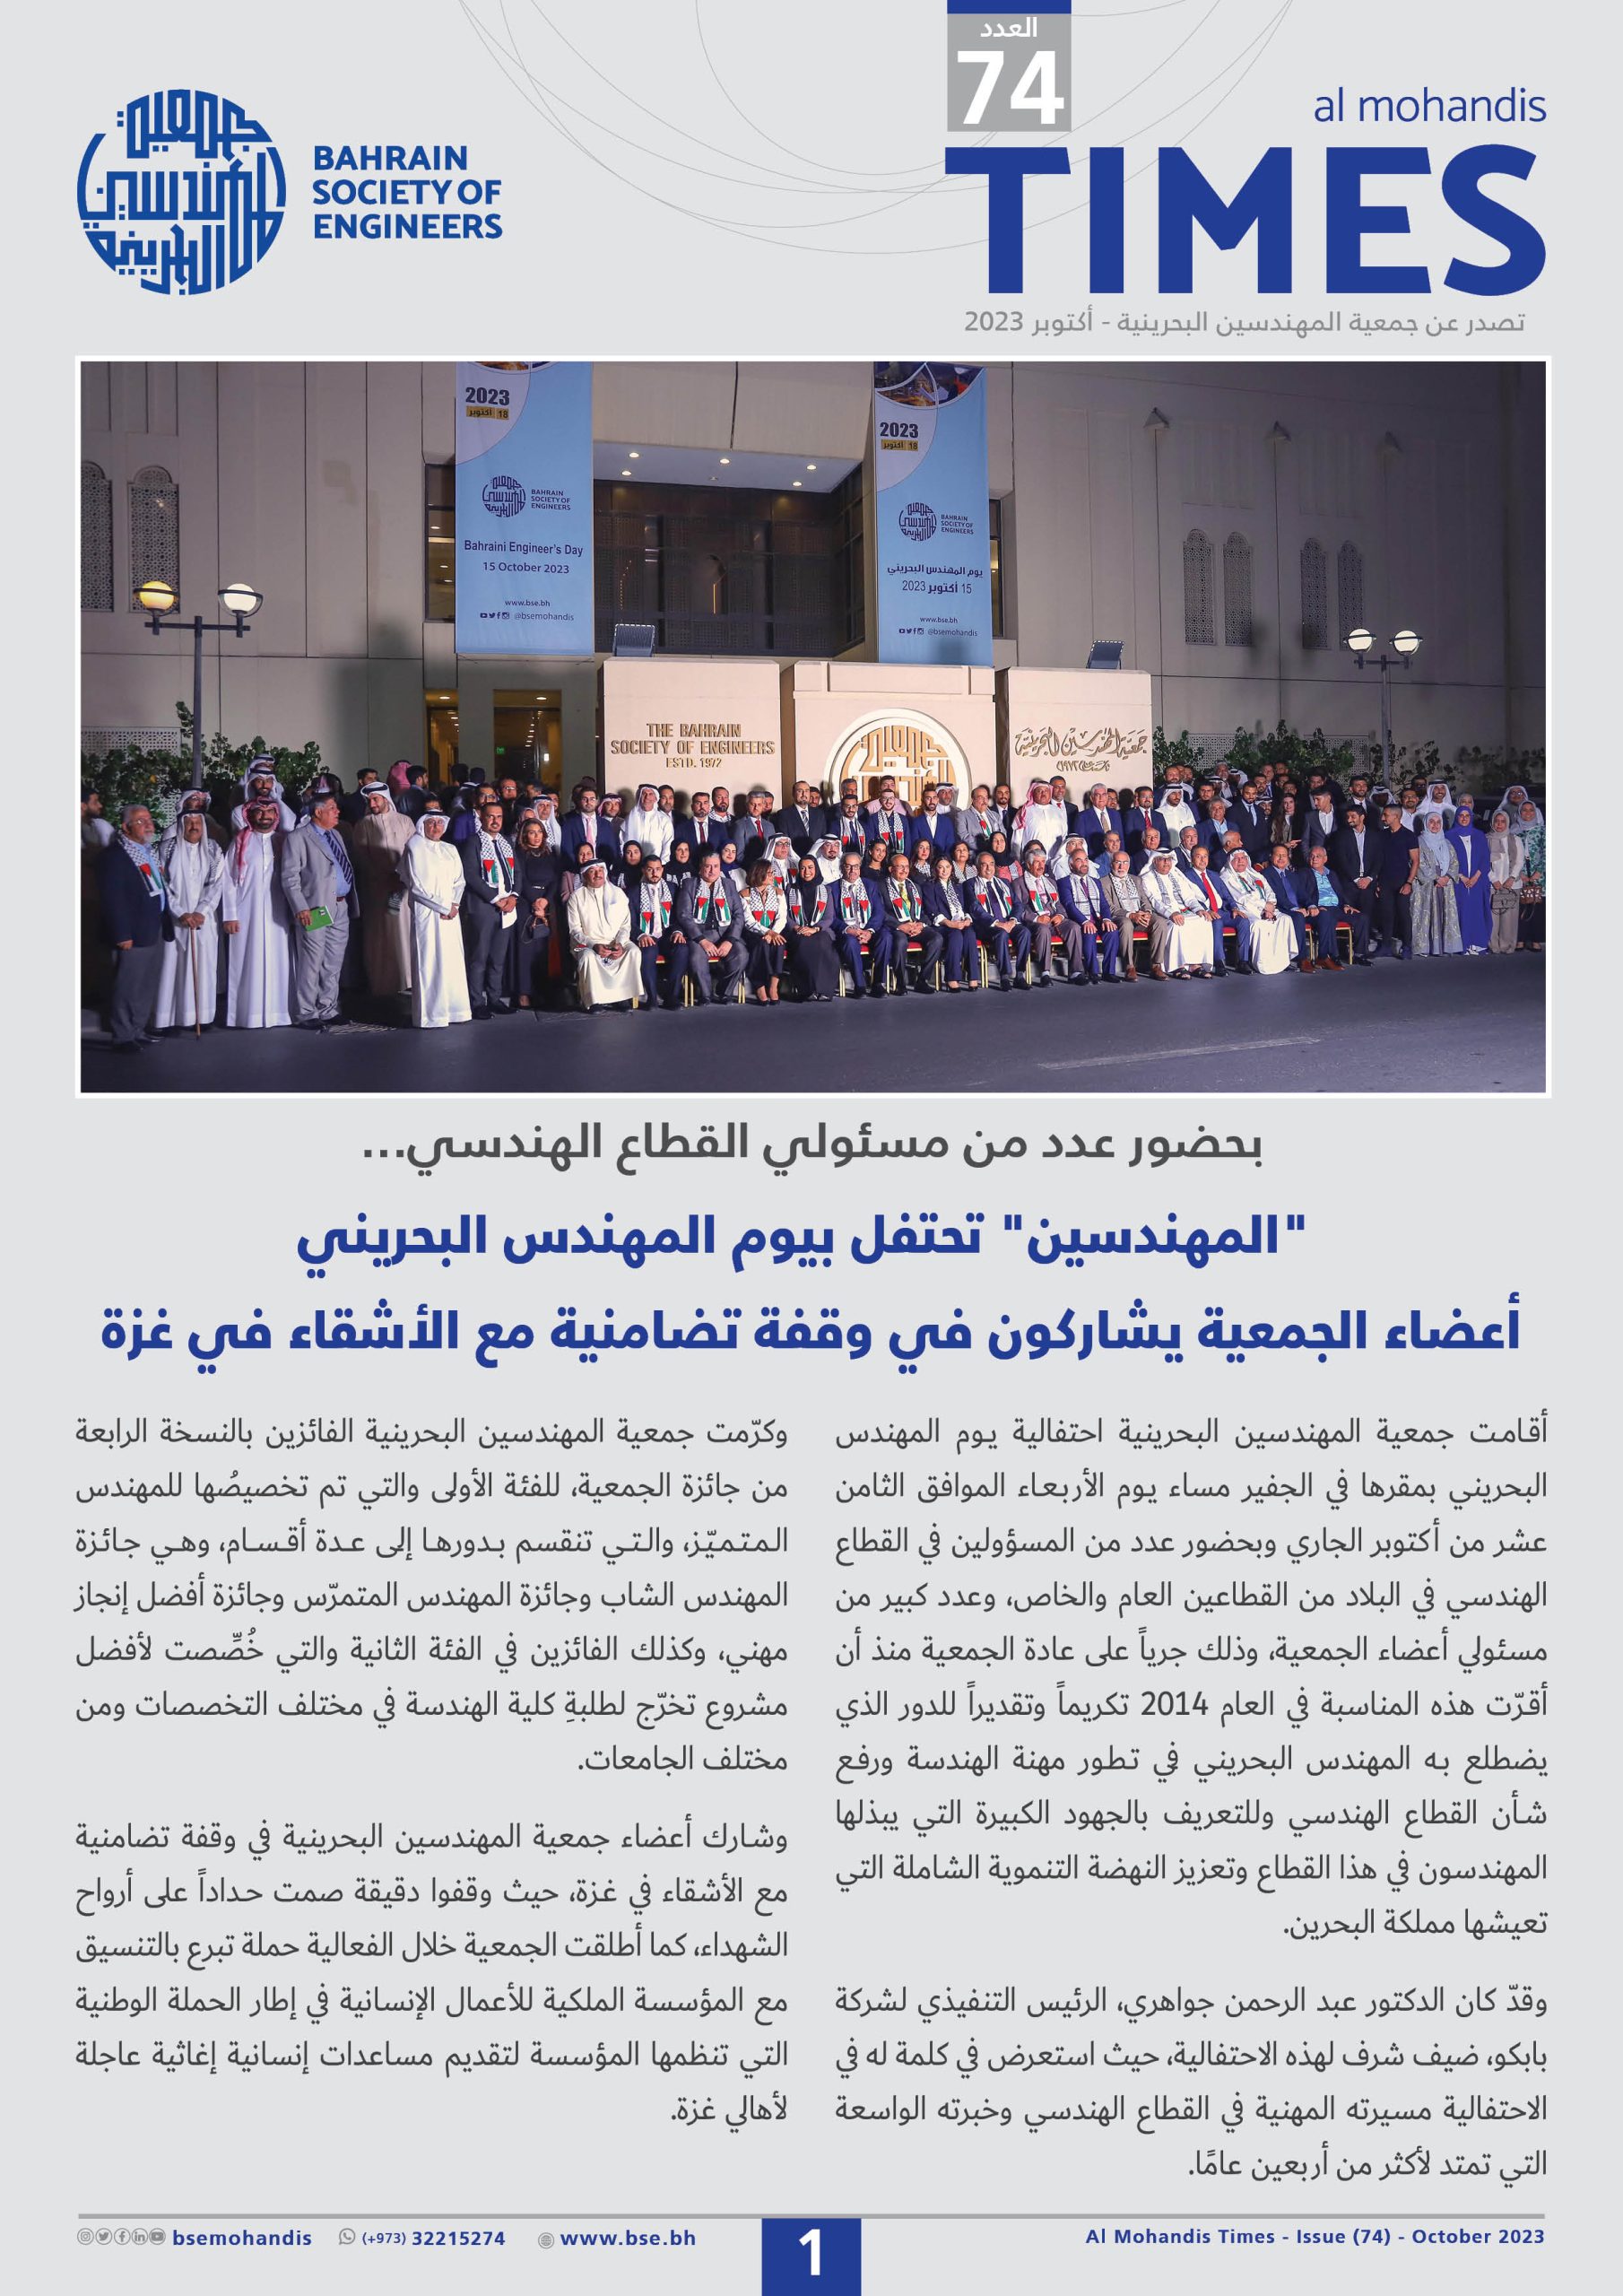 Al Mohandis Times Issue 74